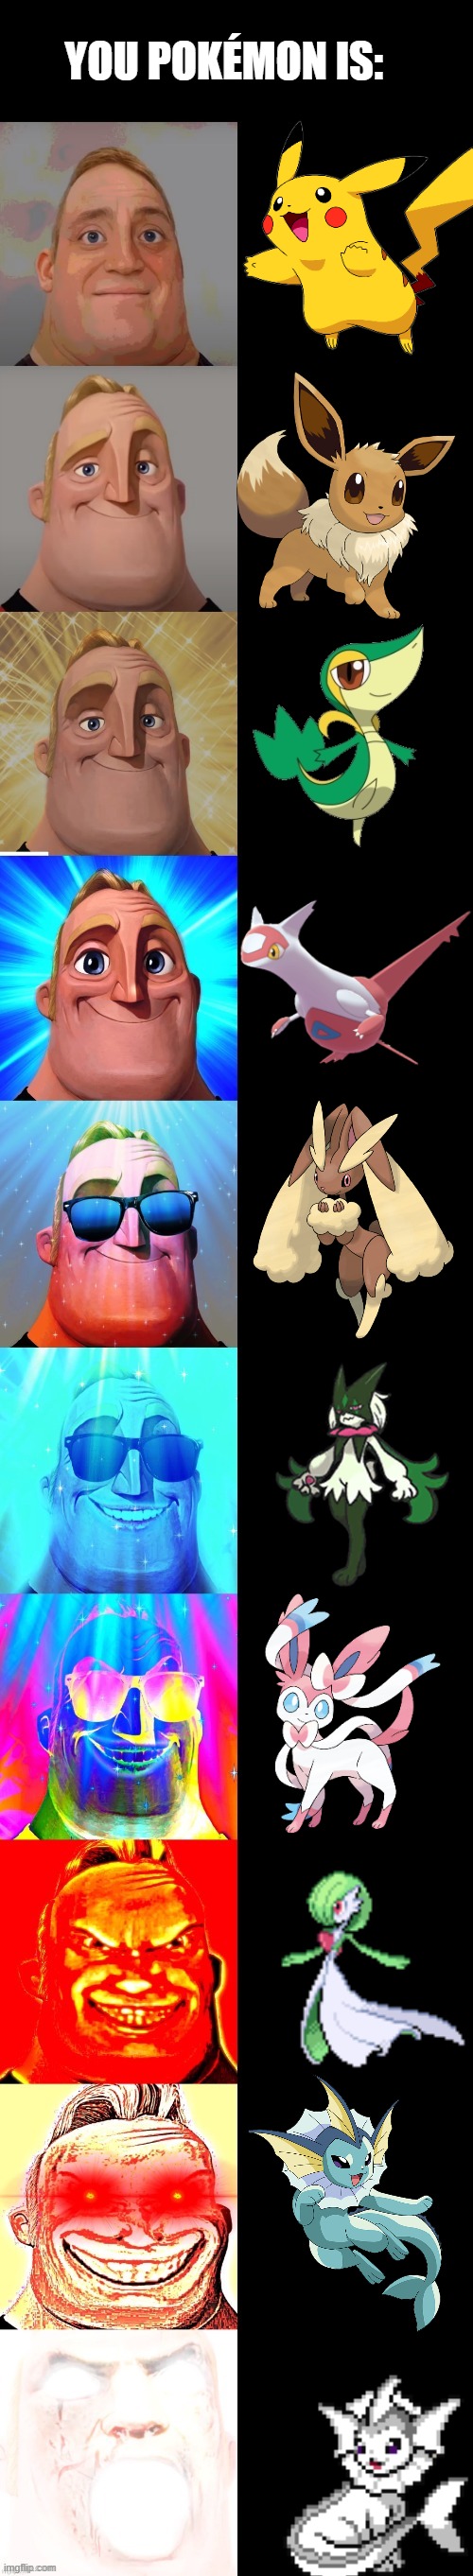 yyyeeeeeeeeeeeeeeeeeeeeeeeeeeeeessssssssssssssssssssssssssssssssssss | YOU POKÉMON IS: | image tagged in mr incredible becoming canny,pokemon,memes | made w/ Imgflip meme maker